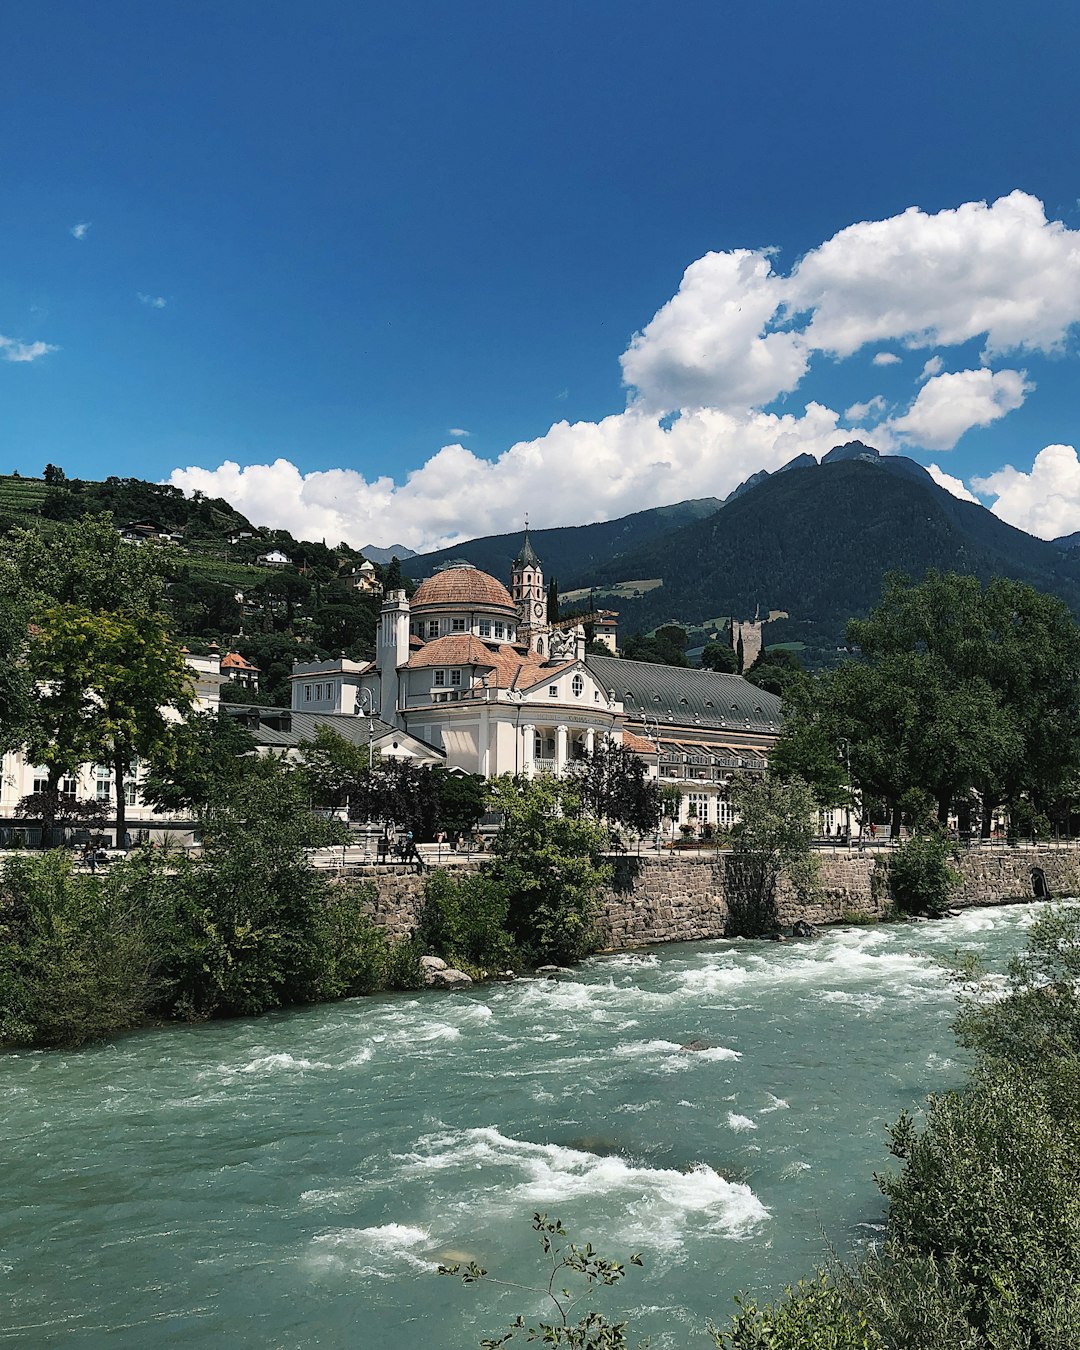 Travel Tips and Stories of Merano in Italy